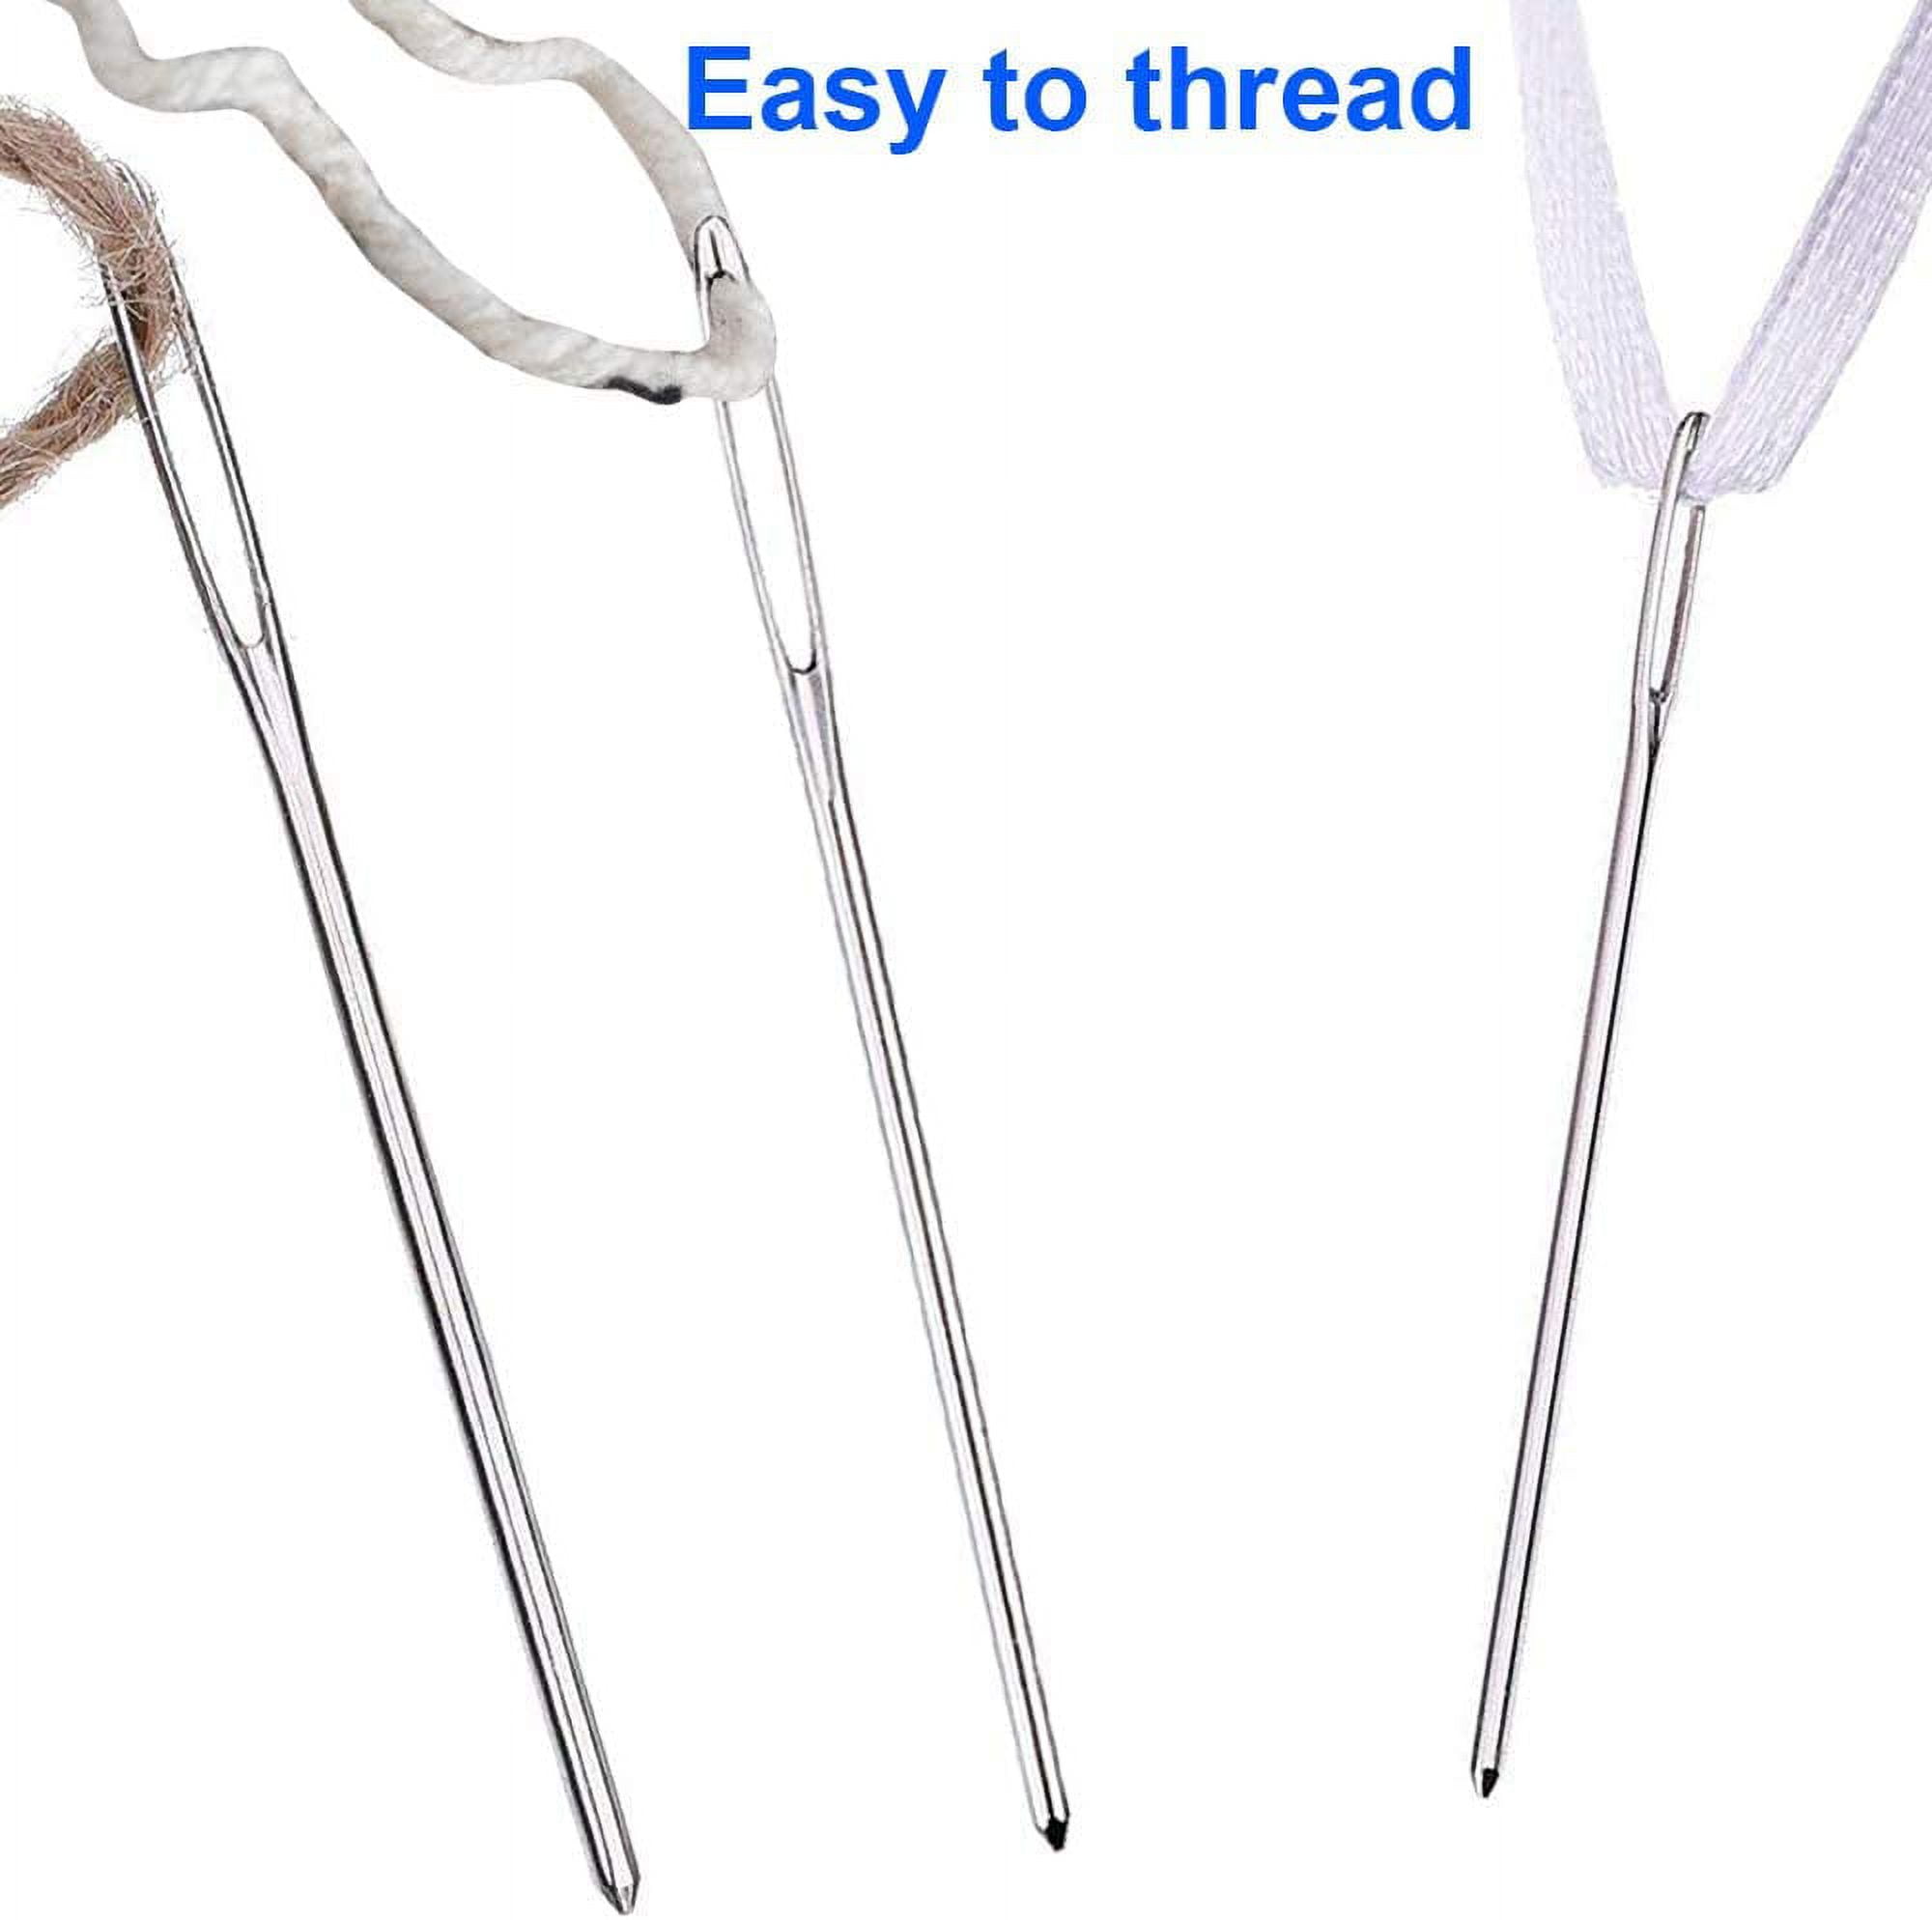 20Pcs Silver Color Large Eye Knitter Needles Yarn Knitting Needles Blunt  Needles for Sewing Embroidery About 52mm in Length